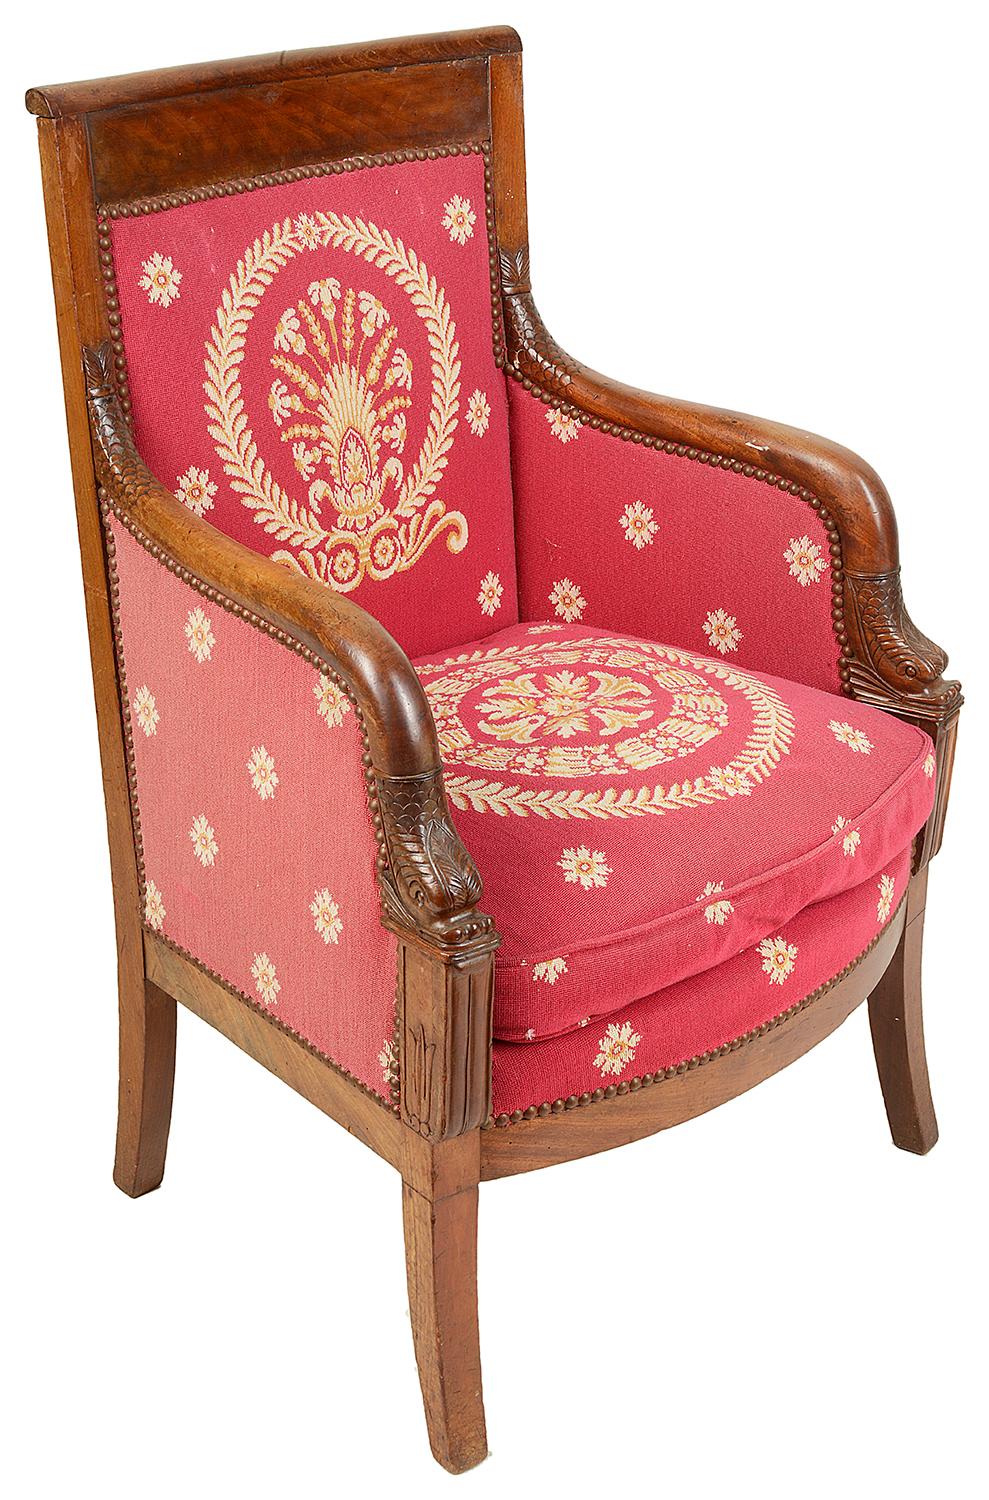 Matched Pair of French Empire Armchairs, 19th Century For Sale 6